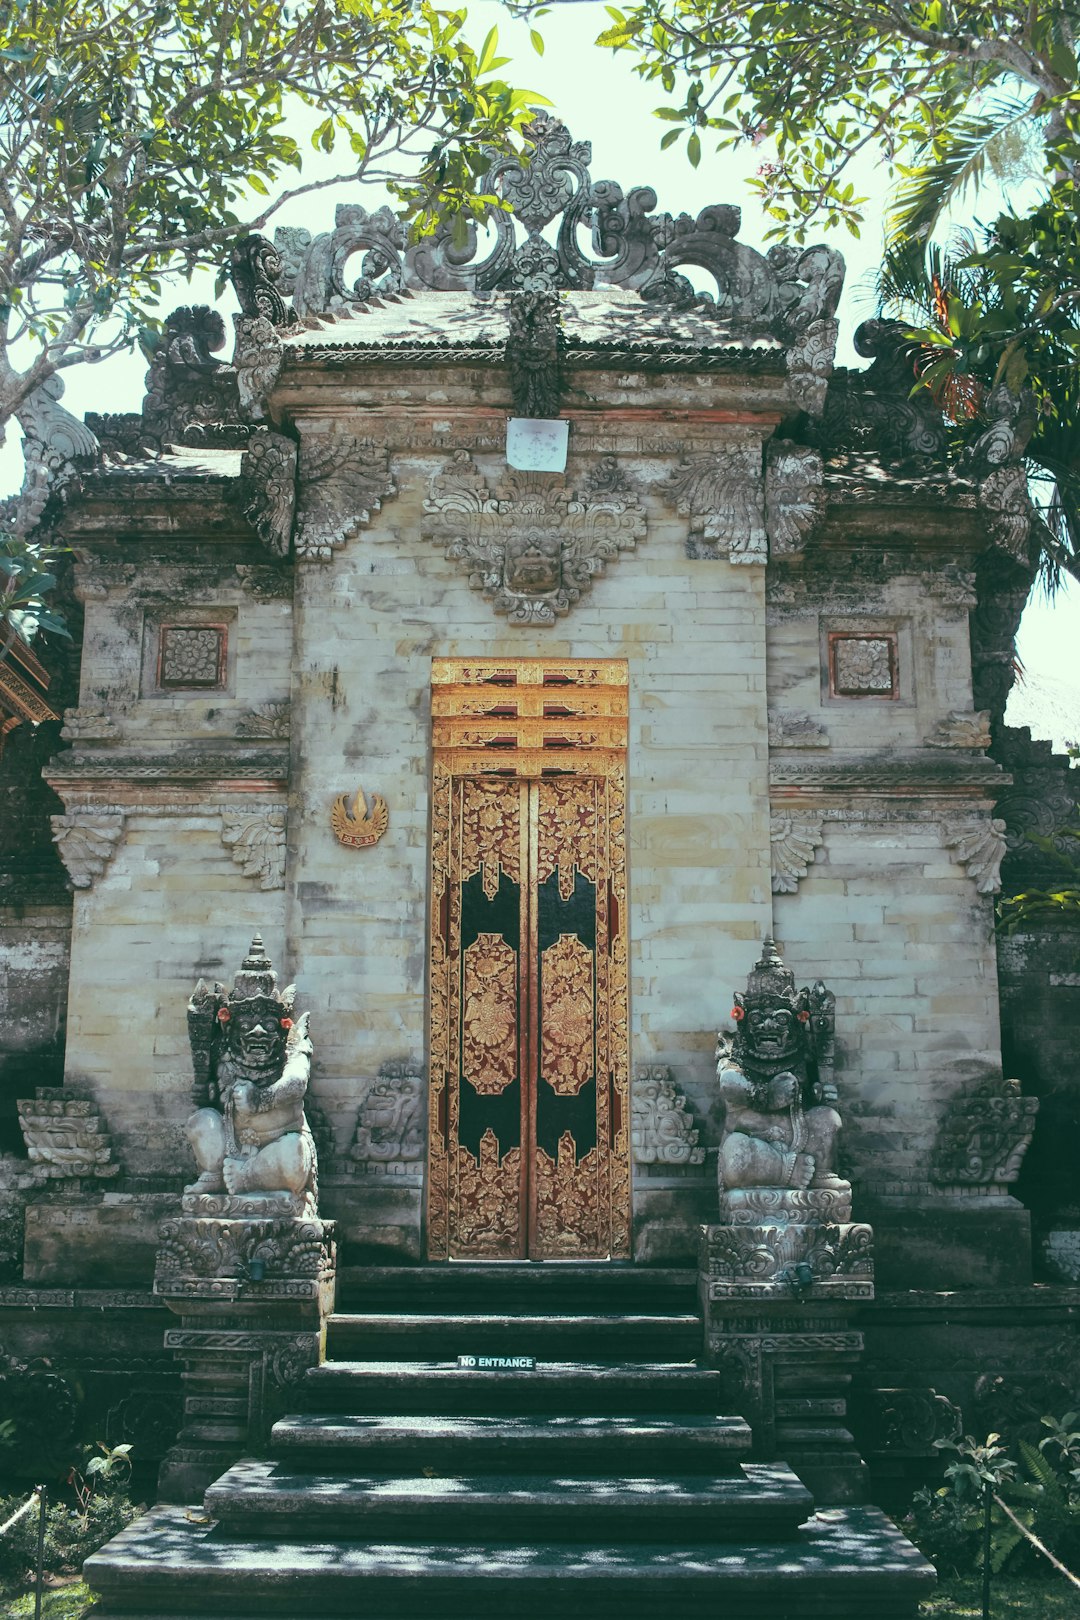 travelers stories about Historic site in Ubud, Indonesia